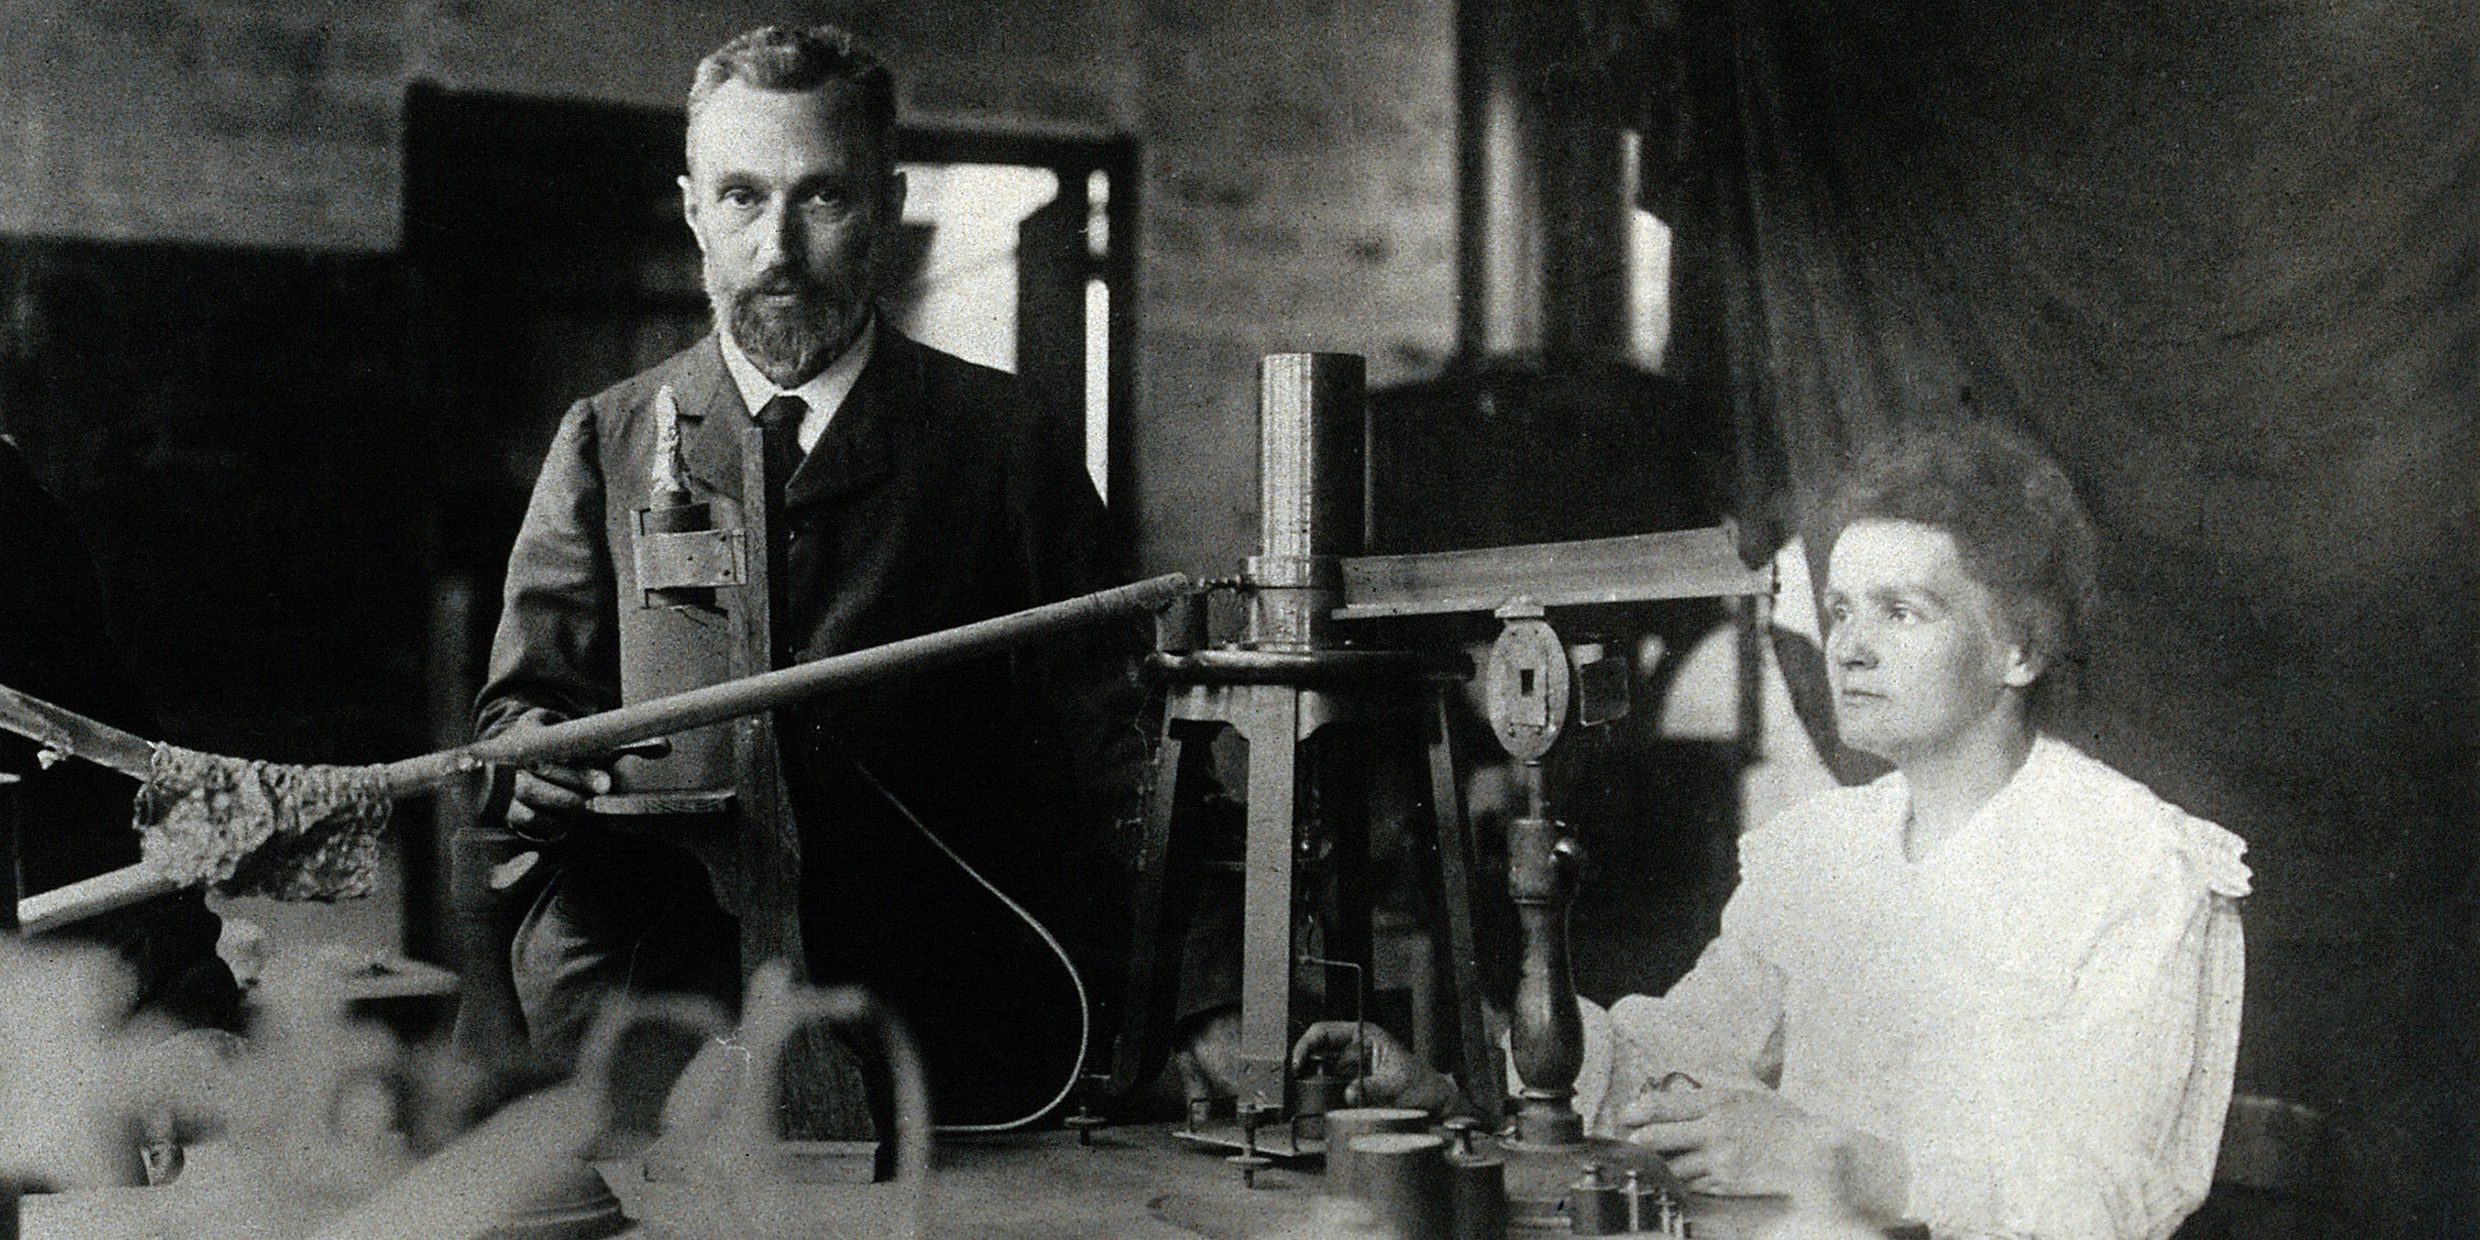 Image of Pierre and Marie Curie